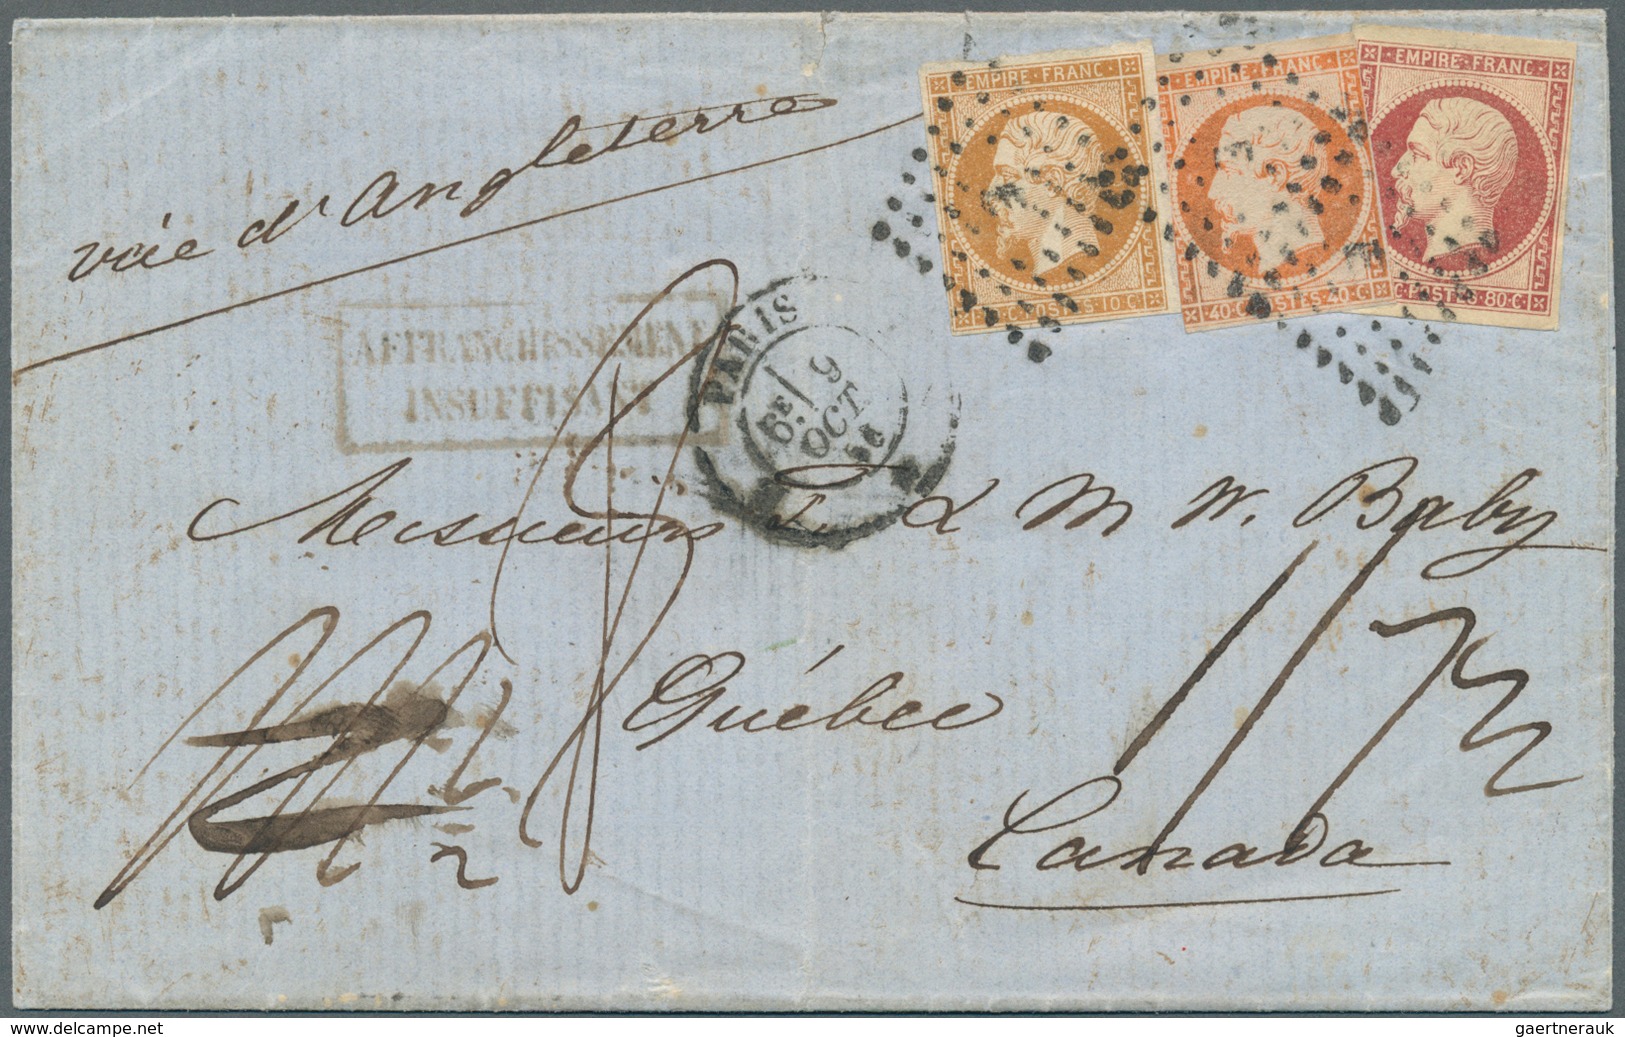 Frankreich: 1856, Folded Letter Franked With 10c, 40 C And 80 C Imperforate Napoleon Issue (usual Ma - Lettres & Documents